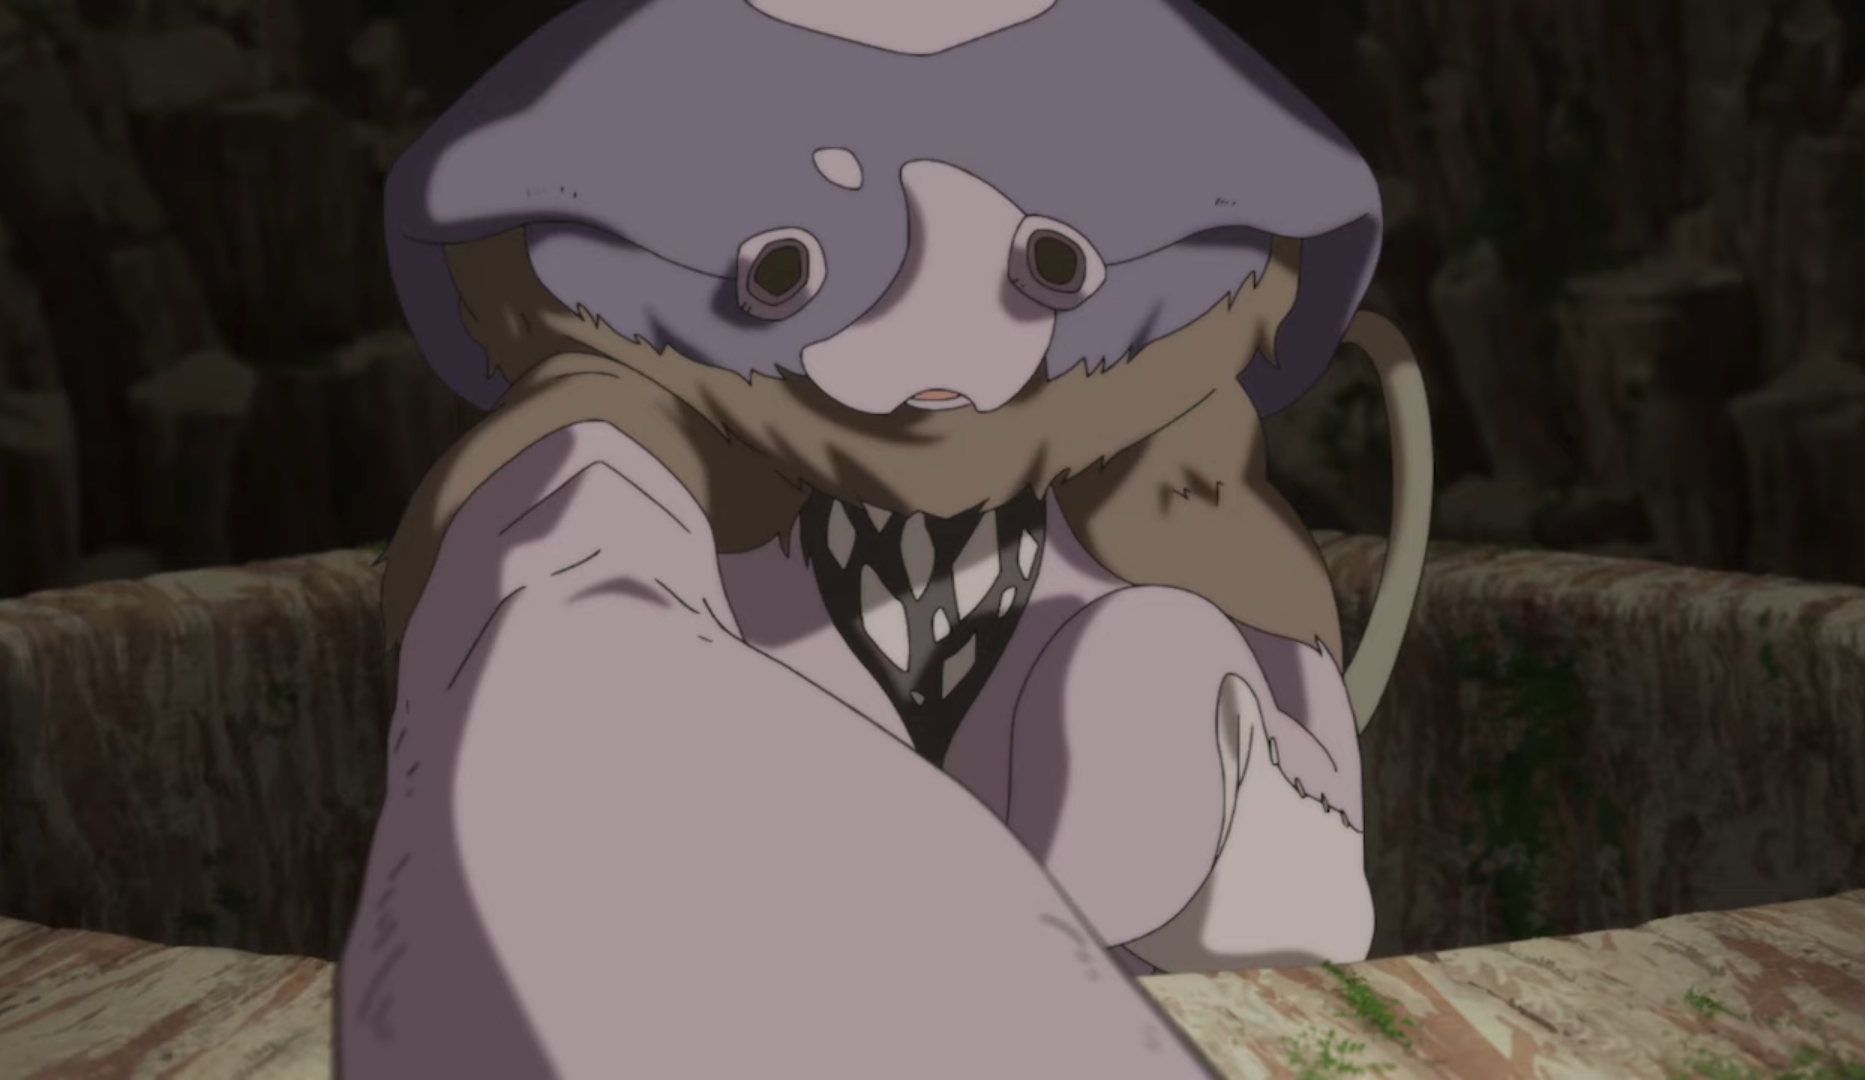 Made In Abyss Season 2 Episode 6 Review: Fighting For Value